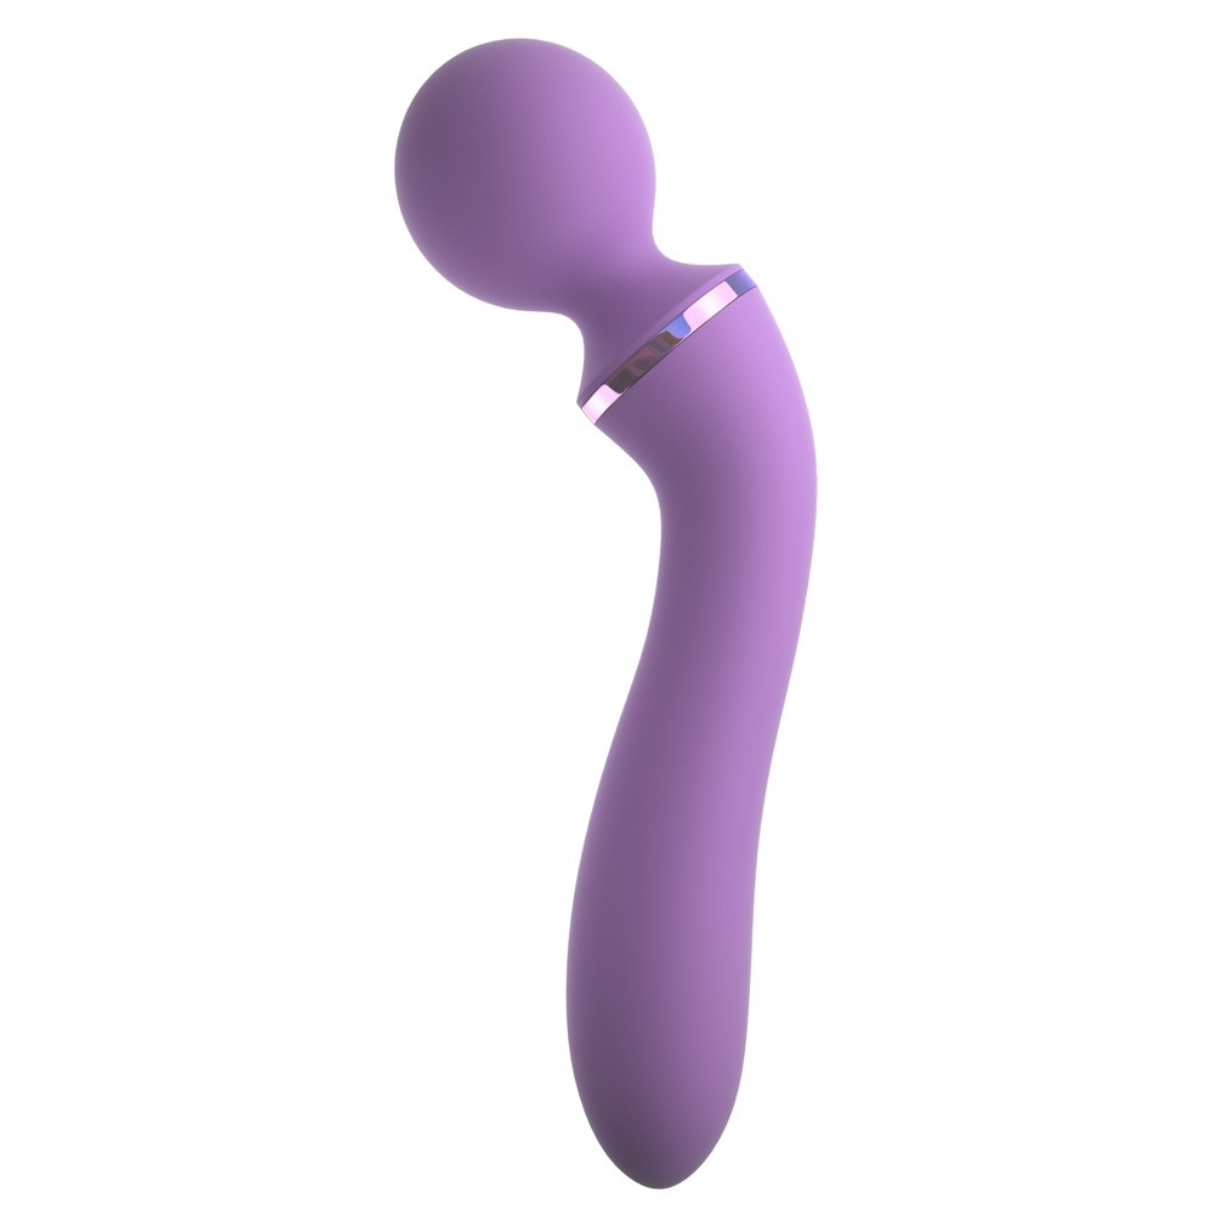 FANTASY FOR HER Duo Wand Vibrator Massage-Her